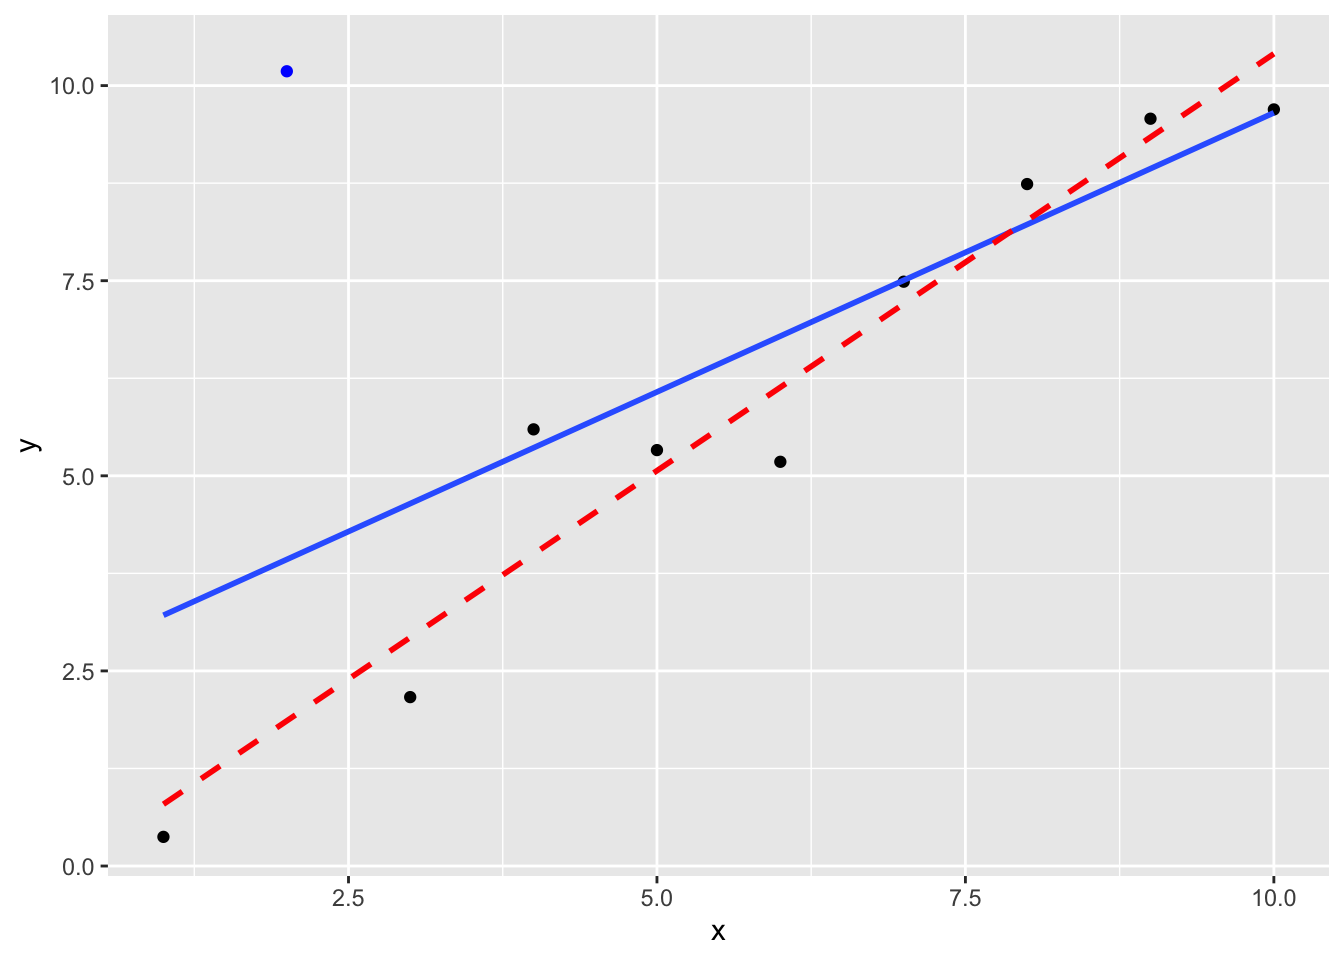 The blue line is the least squares fit using all ten observations. The red dashed line is the least squares fit, omitting the outlier (shown by the blue dot) at $x=2$.